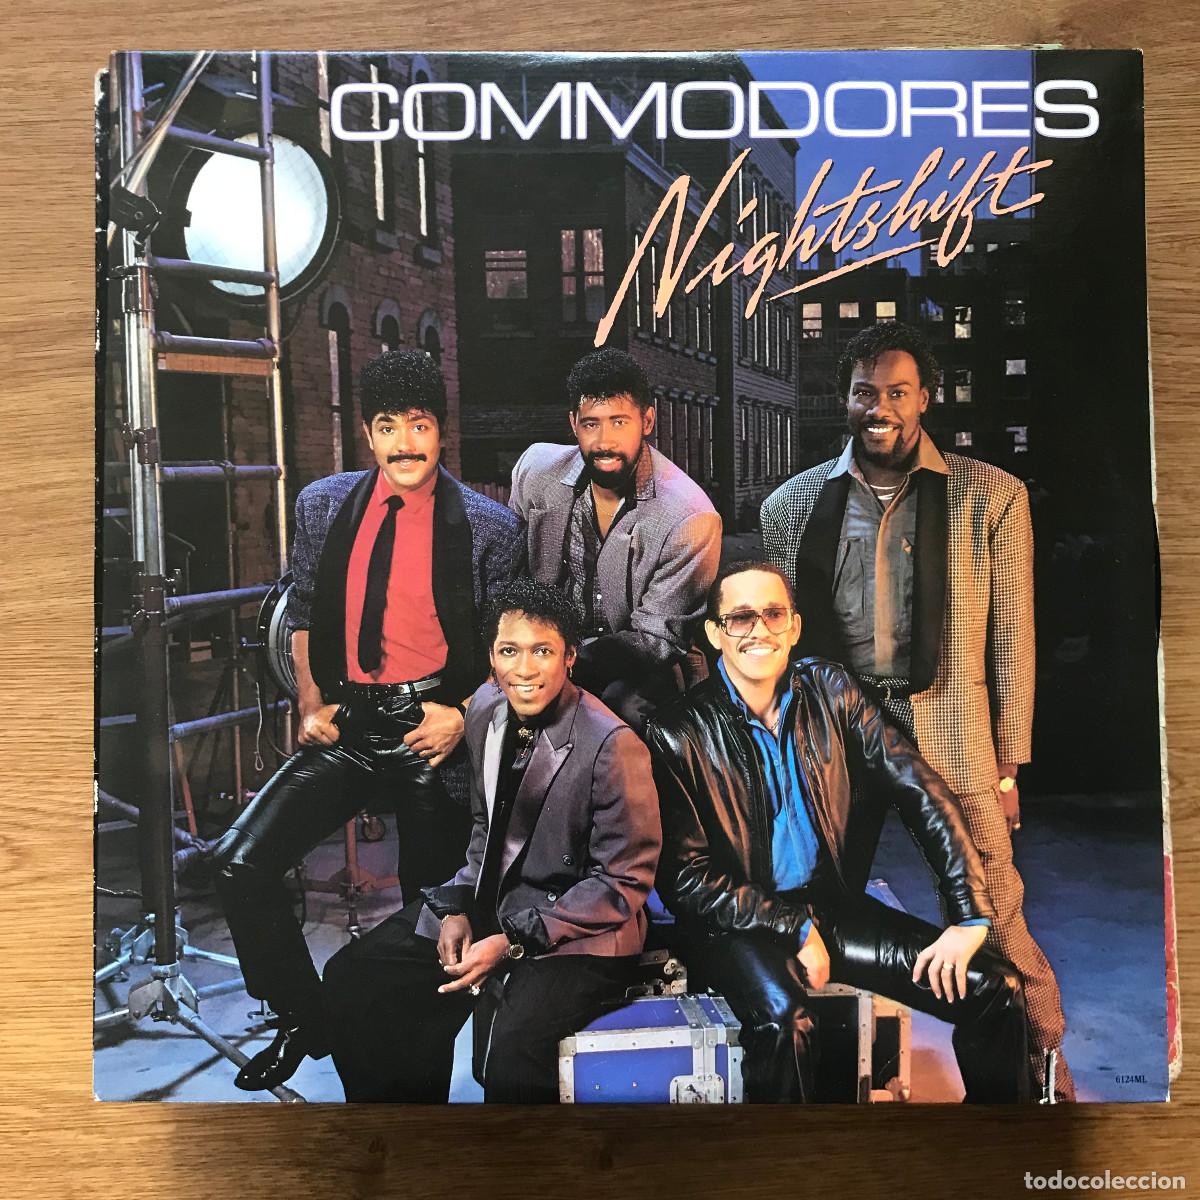 commodores nightshift lp motown usa 1985 Buy LP vinyl records of  Funk, Soul and Black Music on todocoleccion